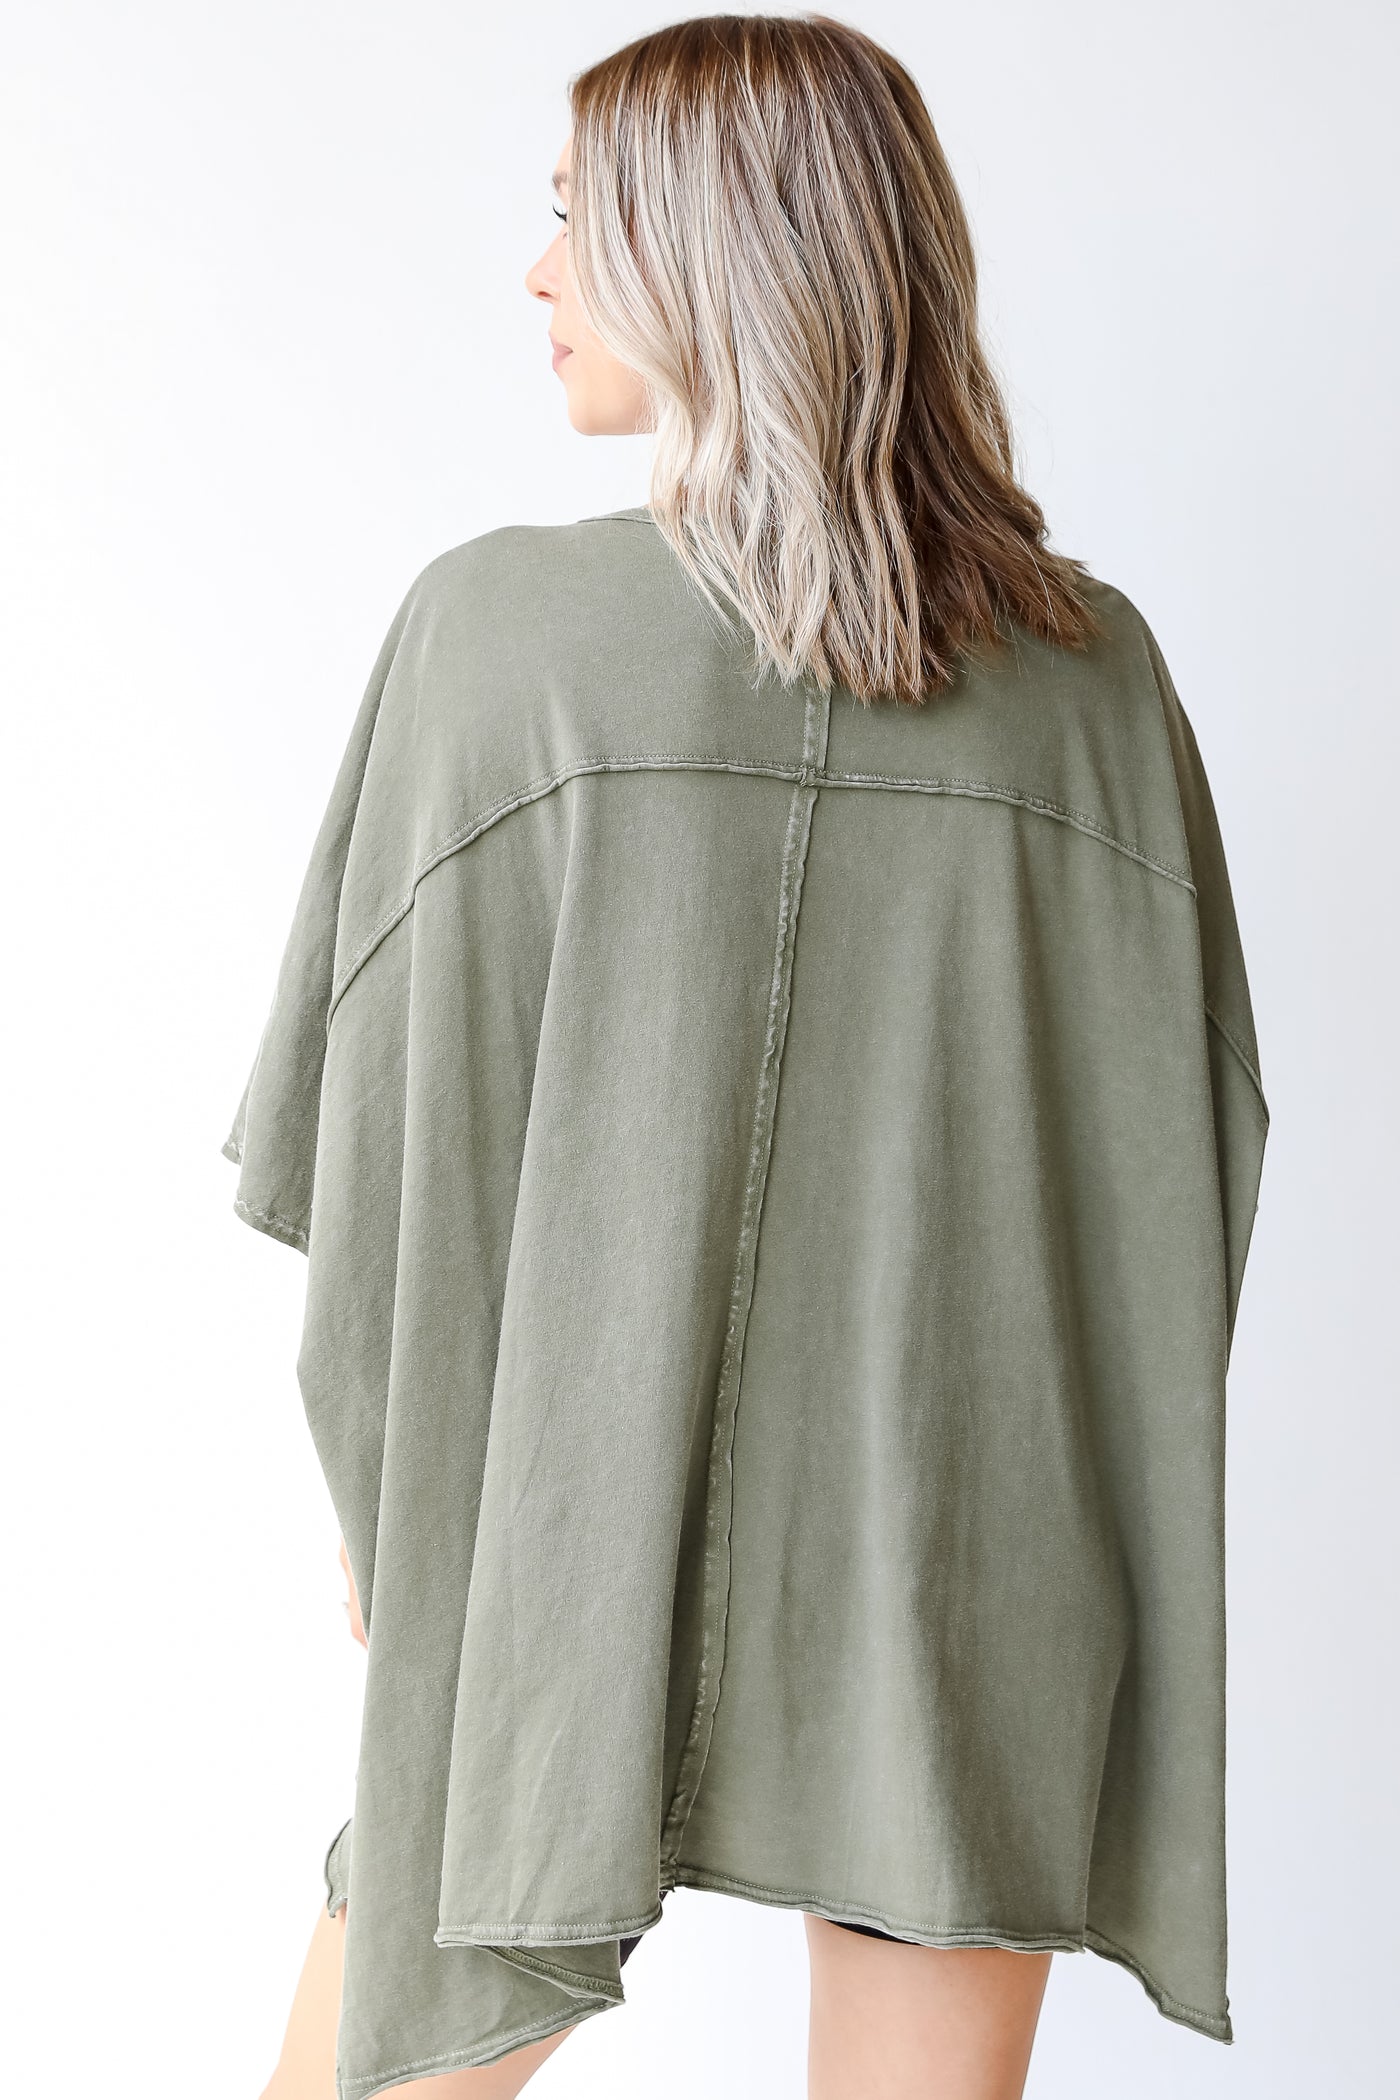 Oversized Tee in olive back view